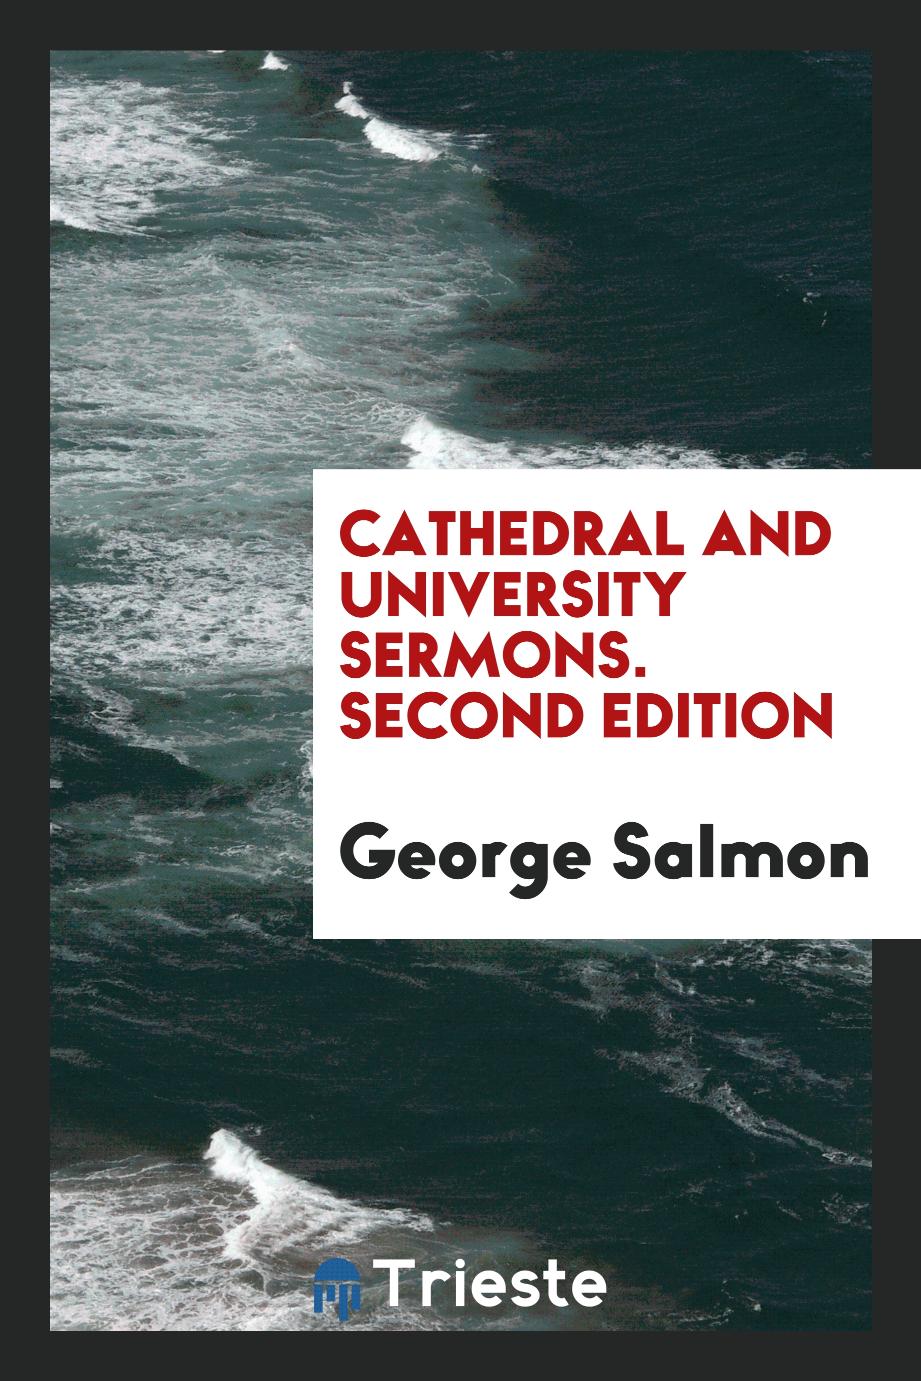 Cathedral and university sermons. Second edition